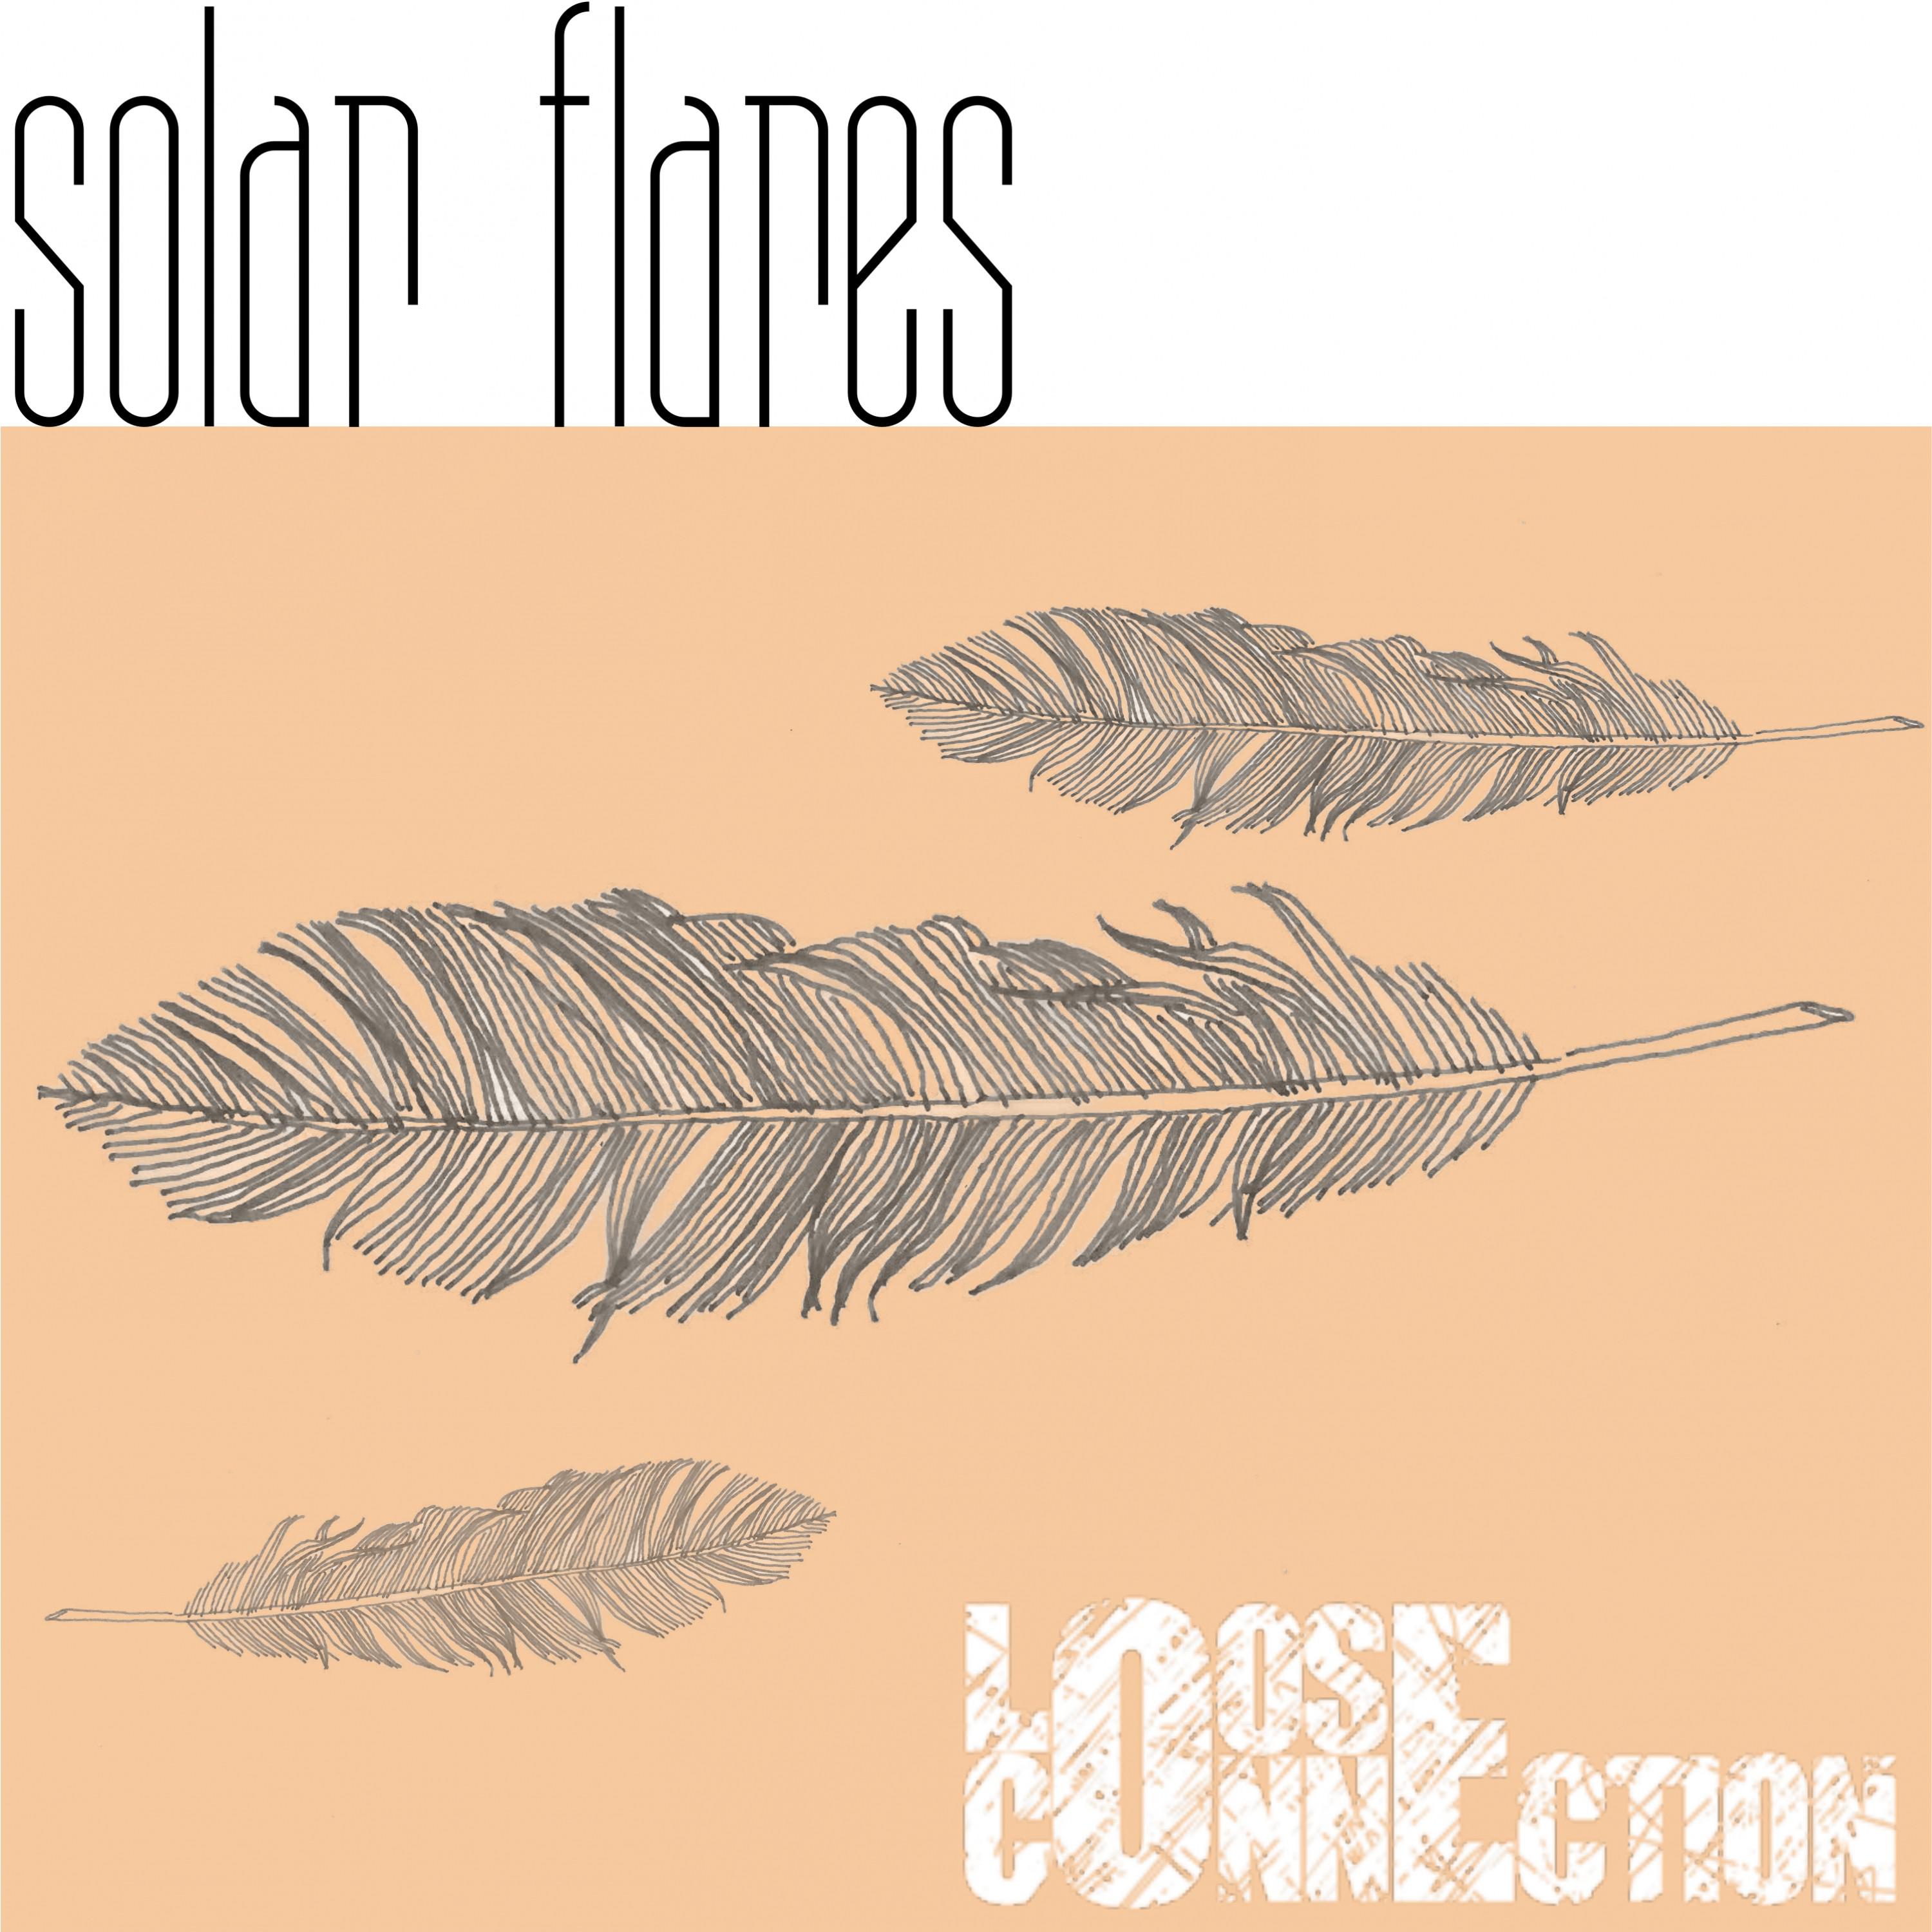 Loose Connection - Solar Flares